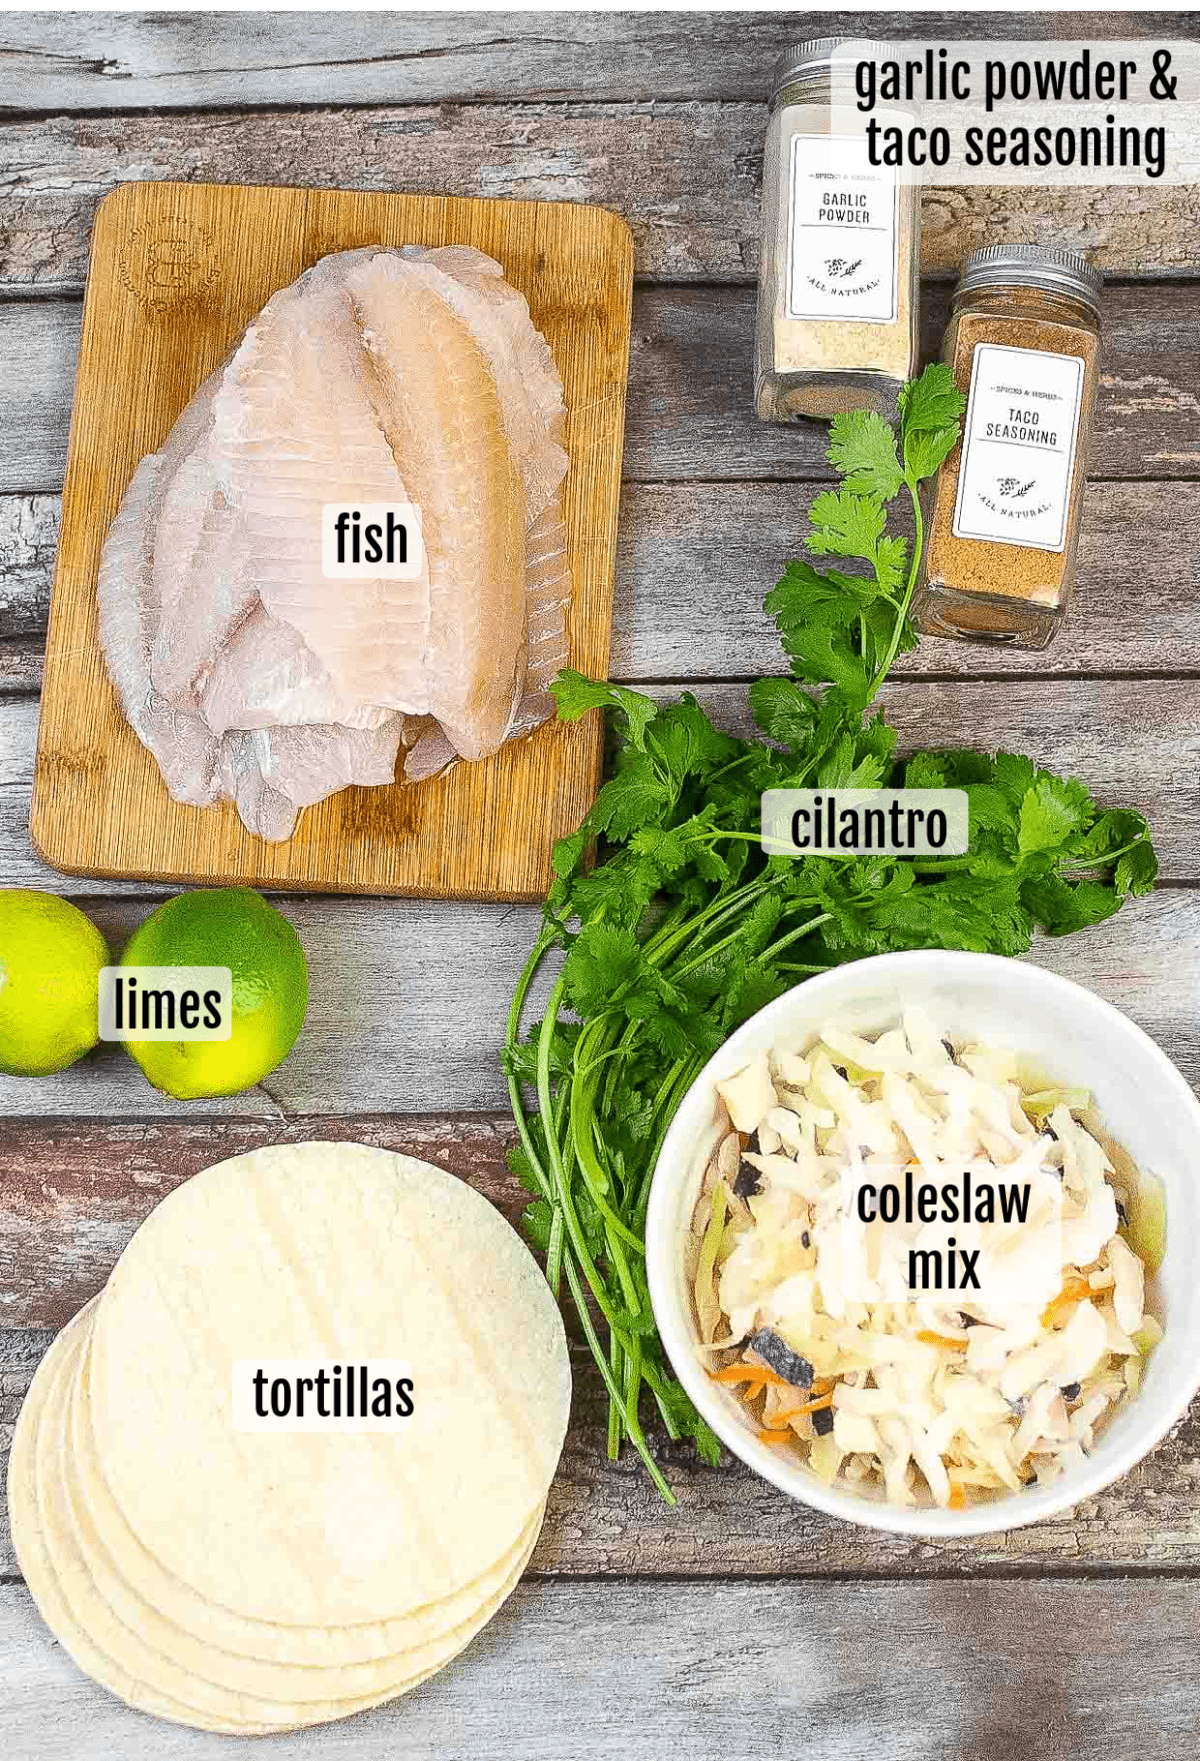 Overhead shot of the ingredients needed to make the fish tacos.